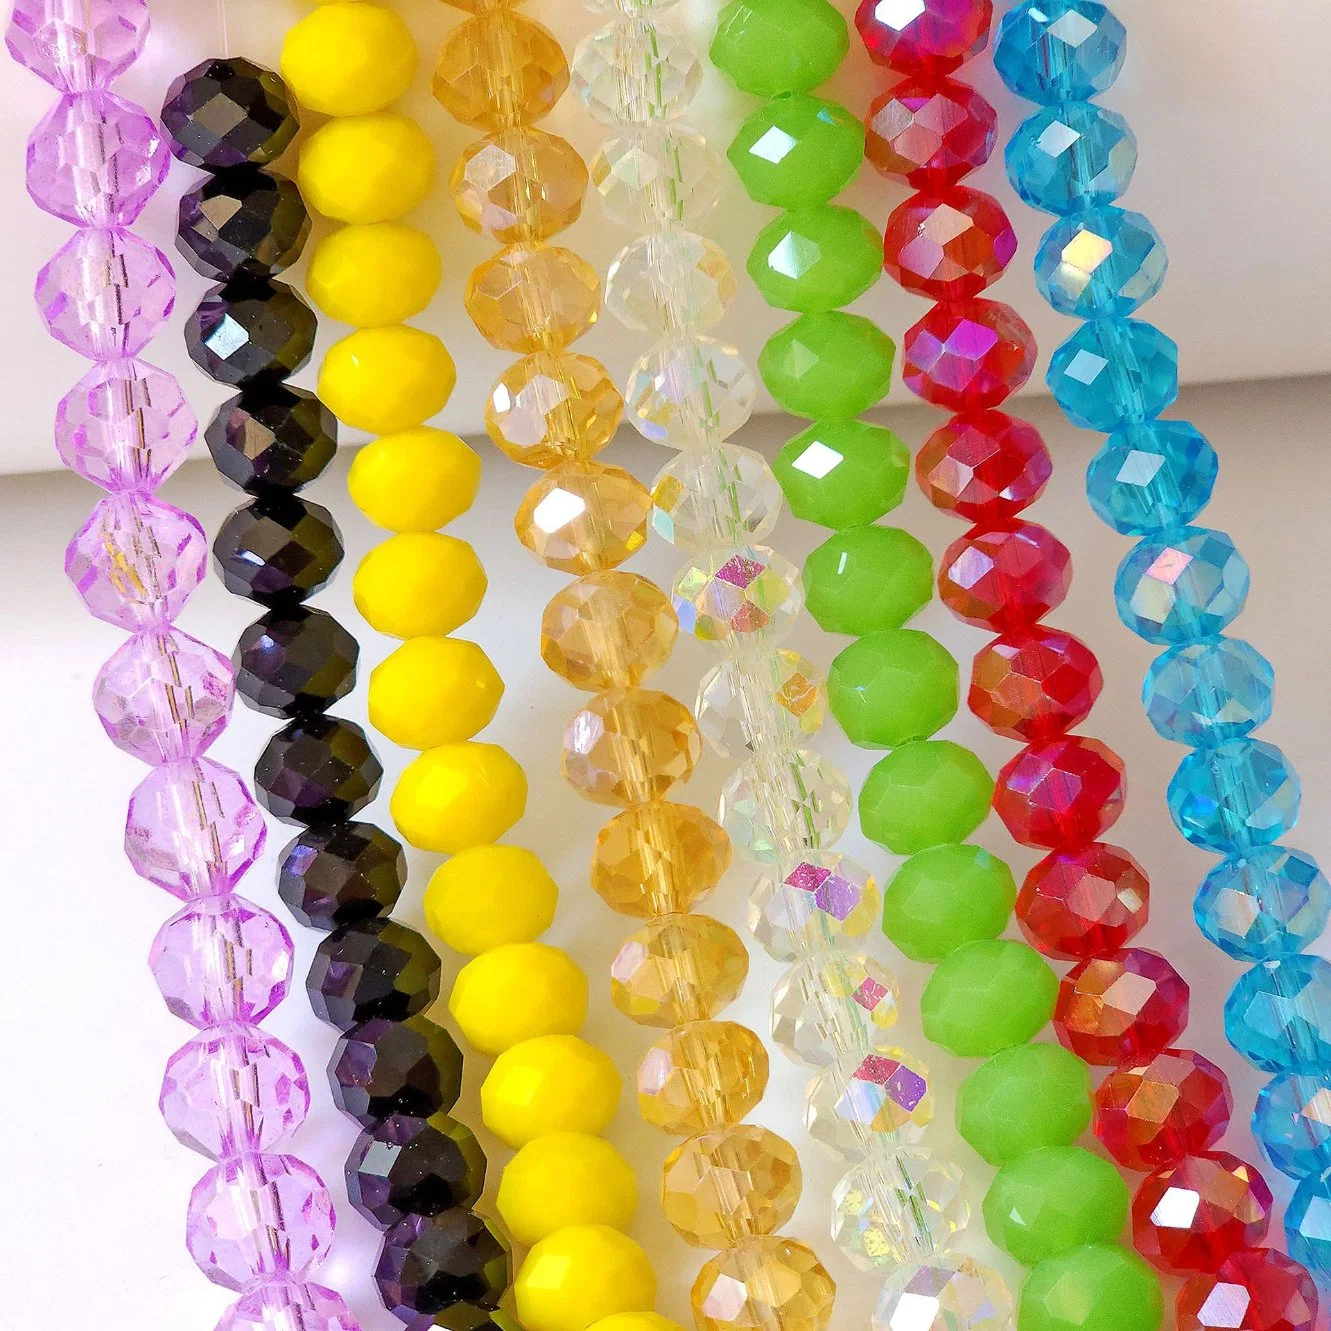 Wholesale 4-14mm Crystal Flat Beads Glass Beads for Bracelet Jewelry Making